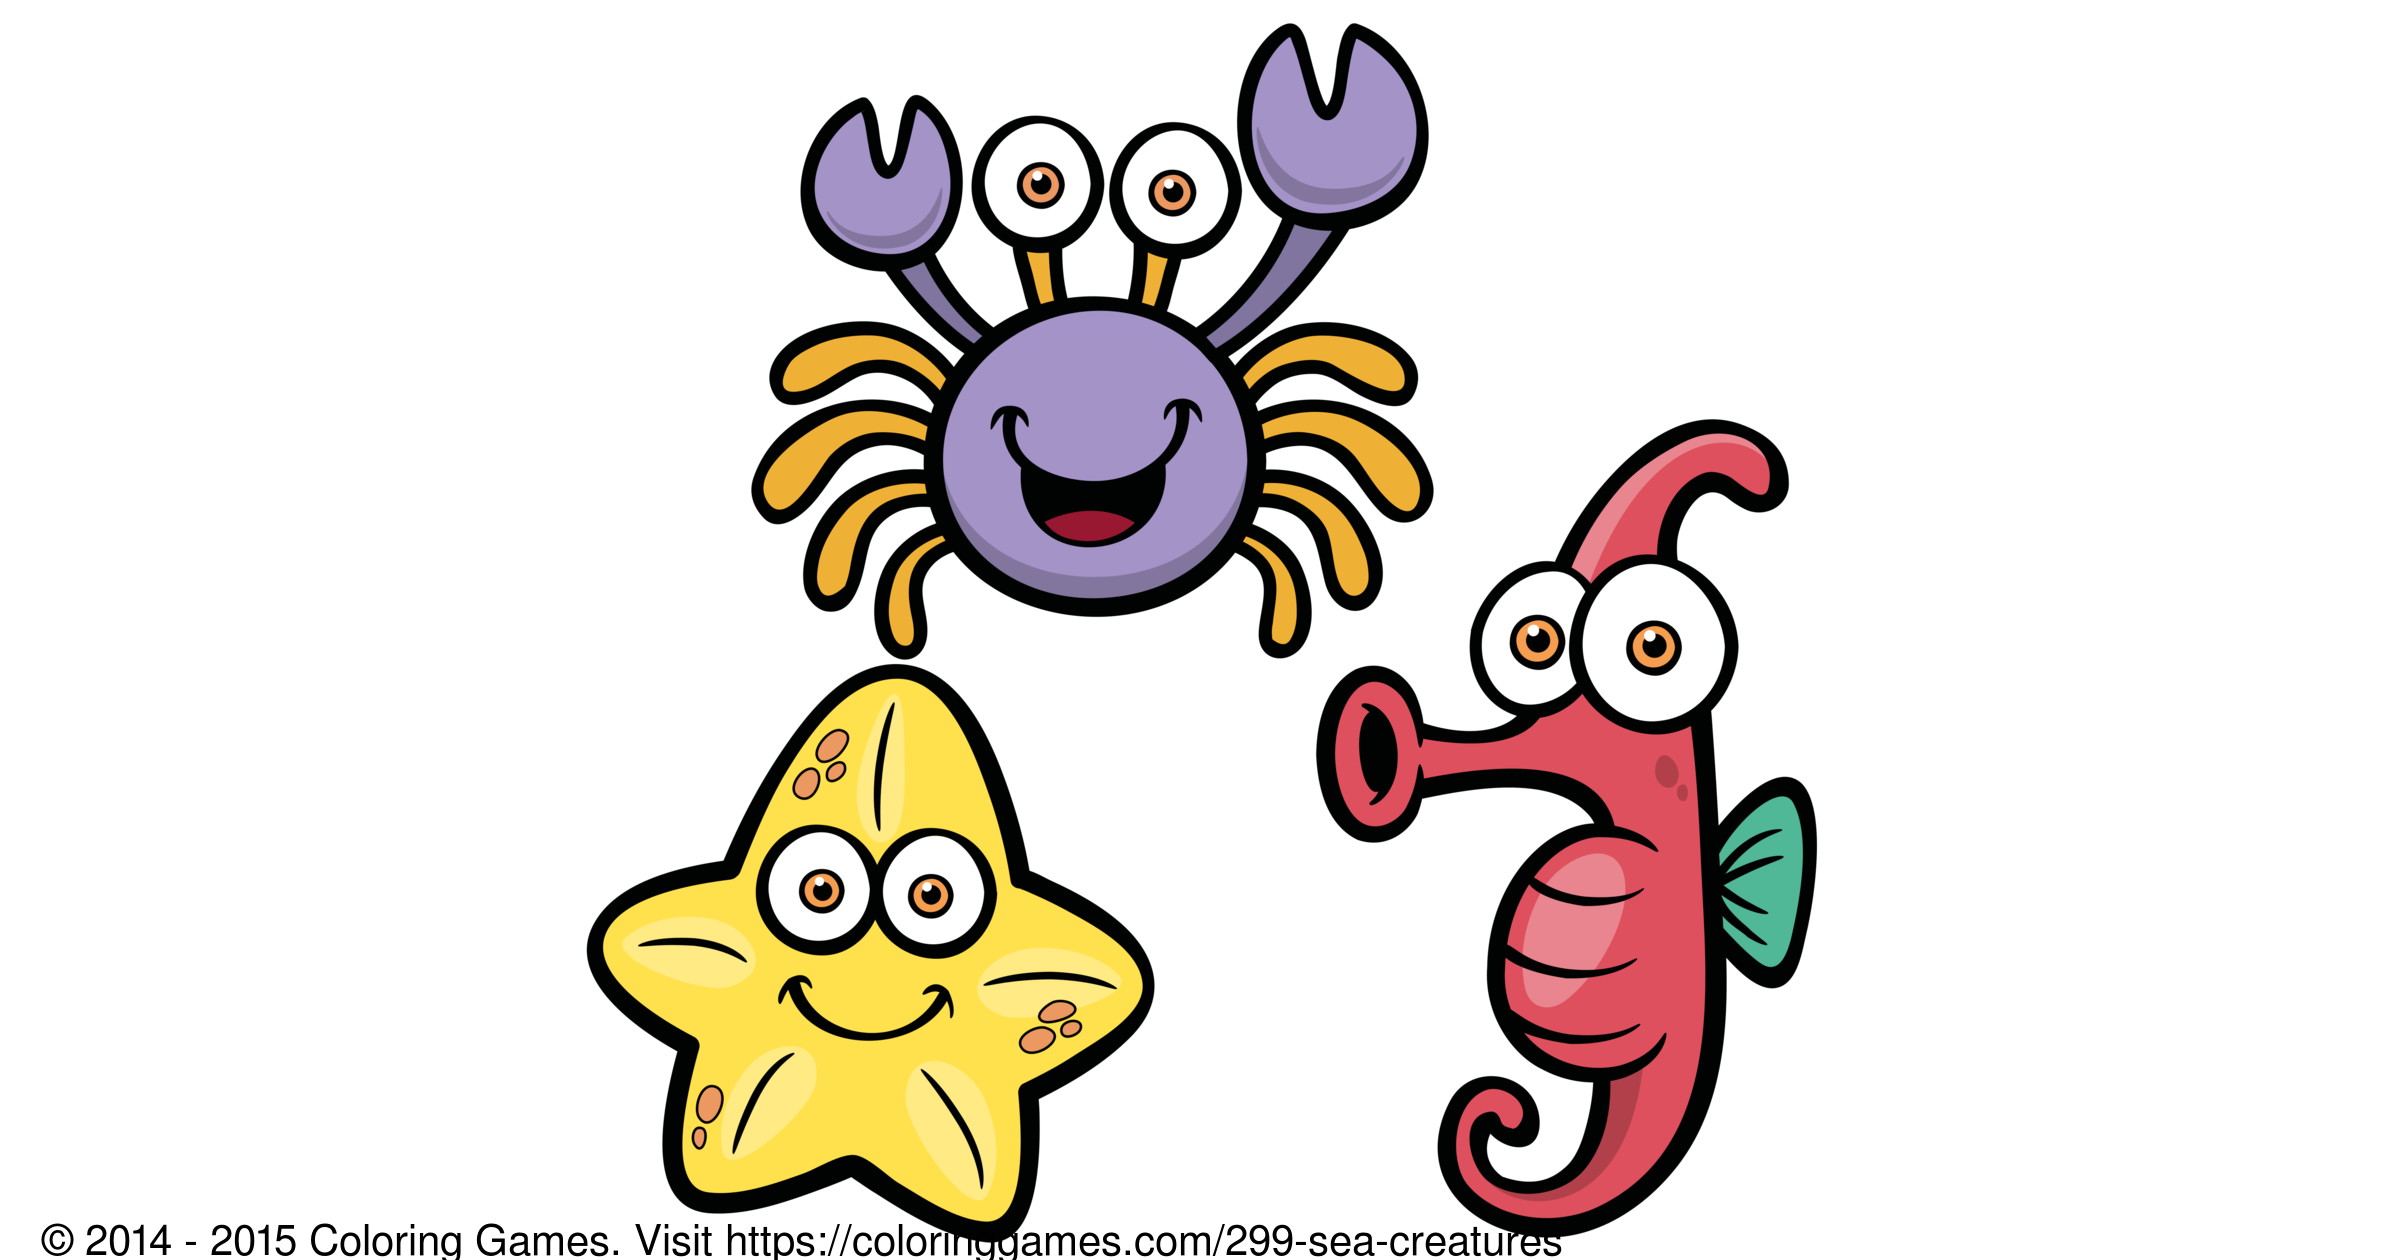 Sea Creatures - Coloring Games and Coloring Pages